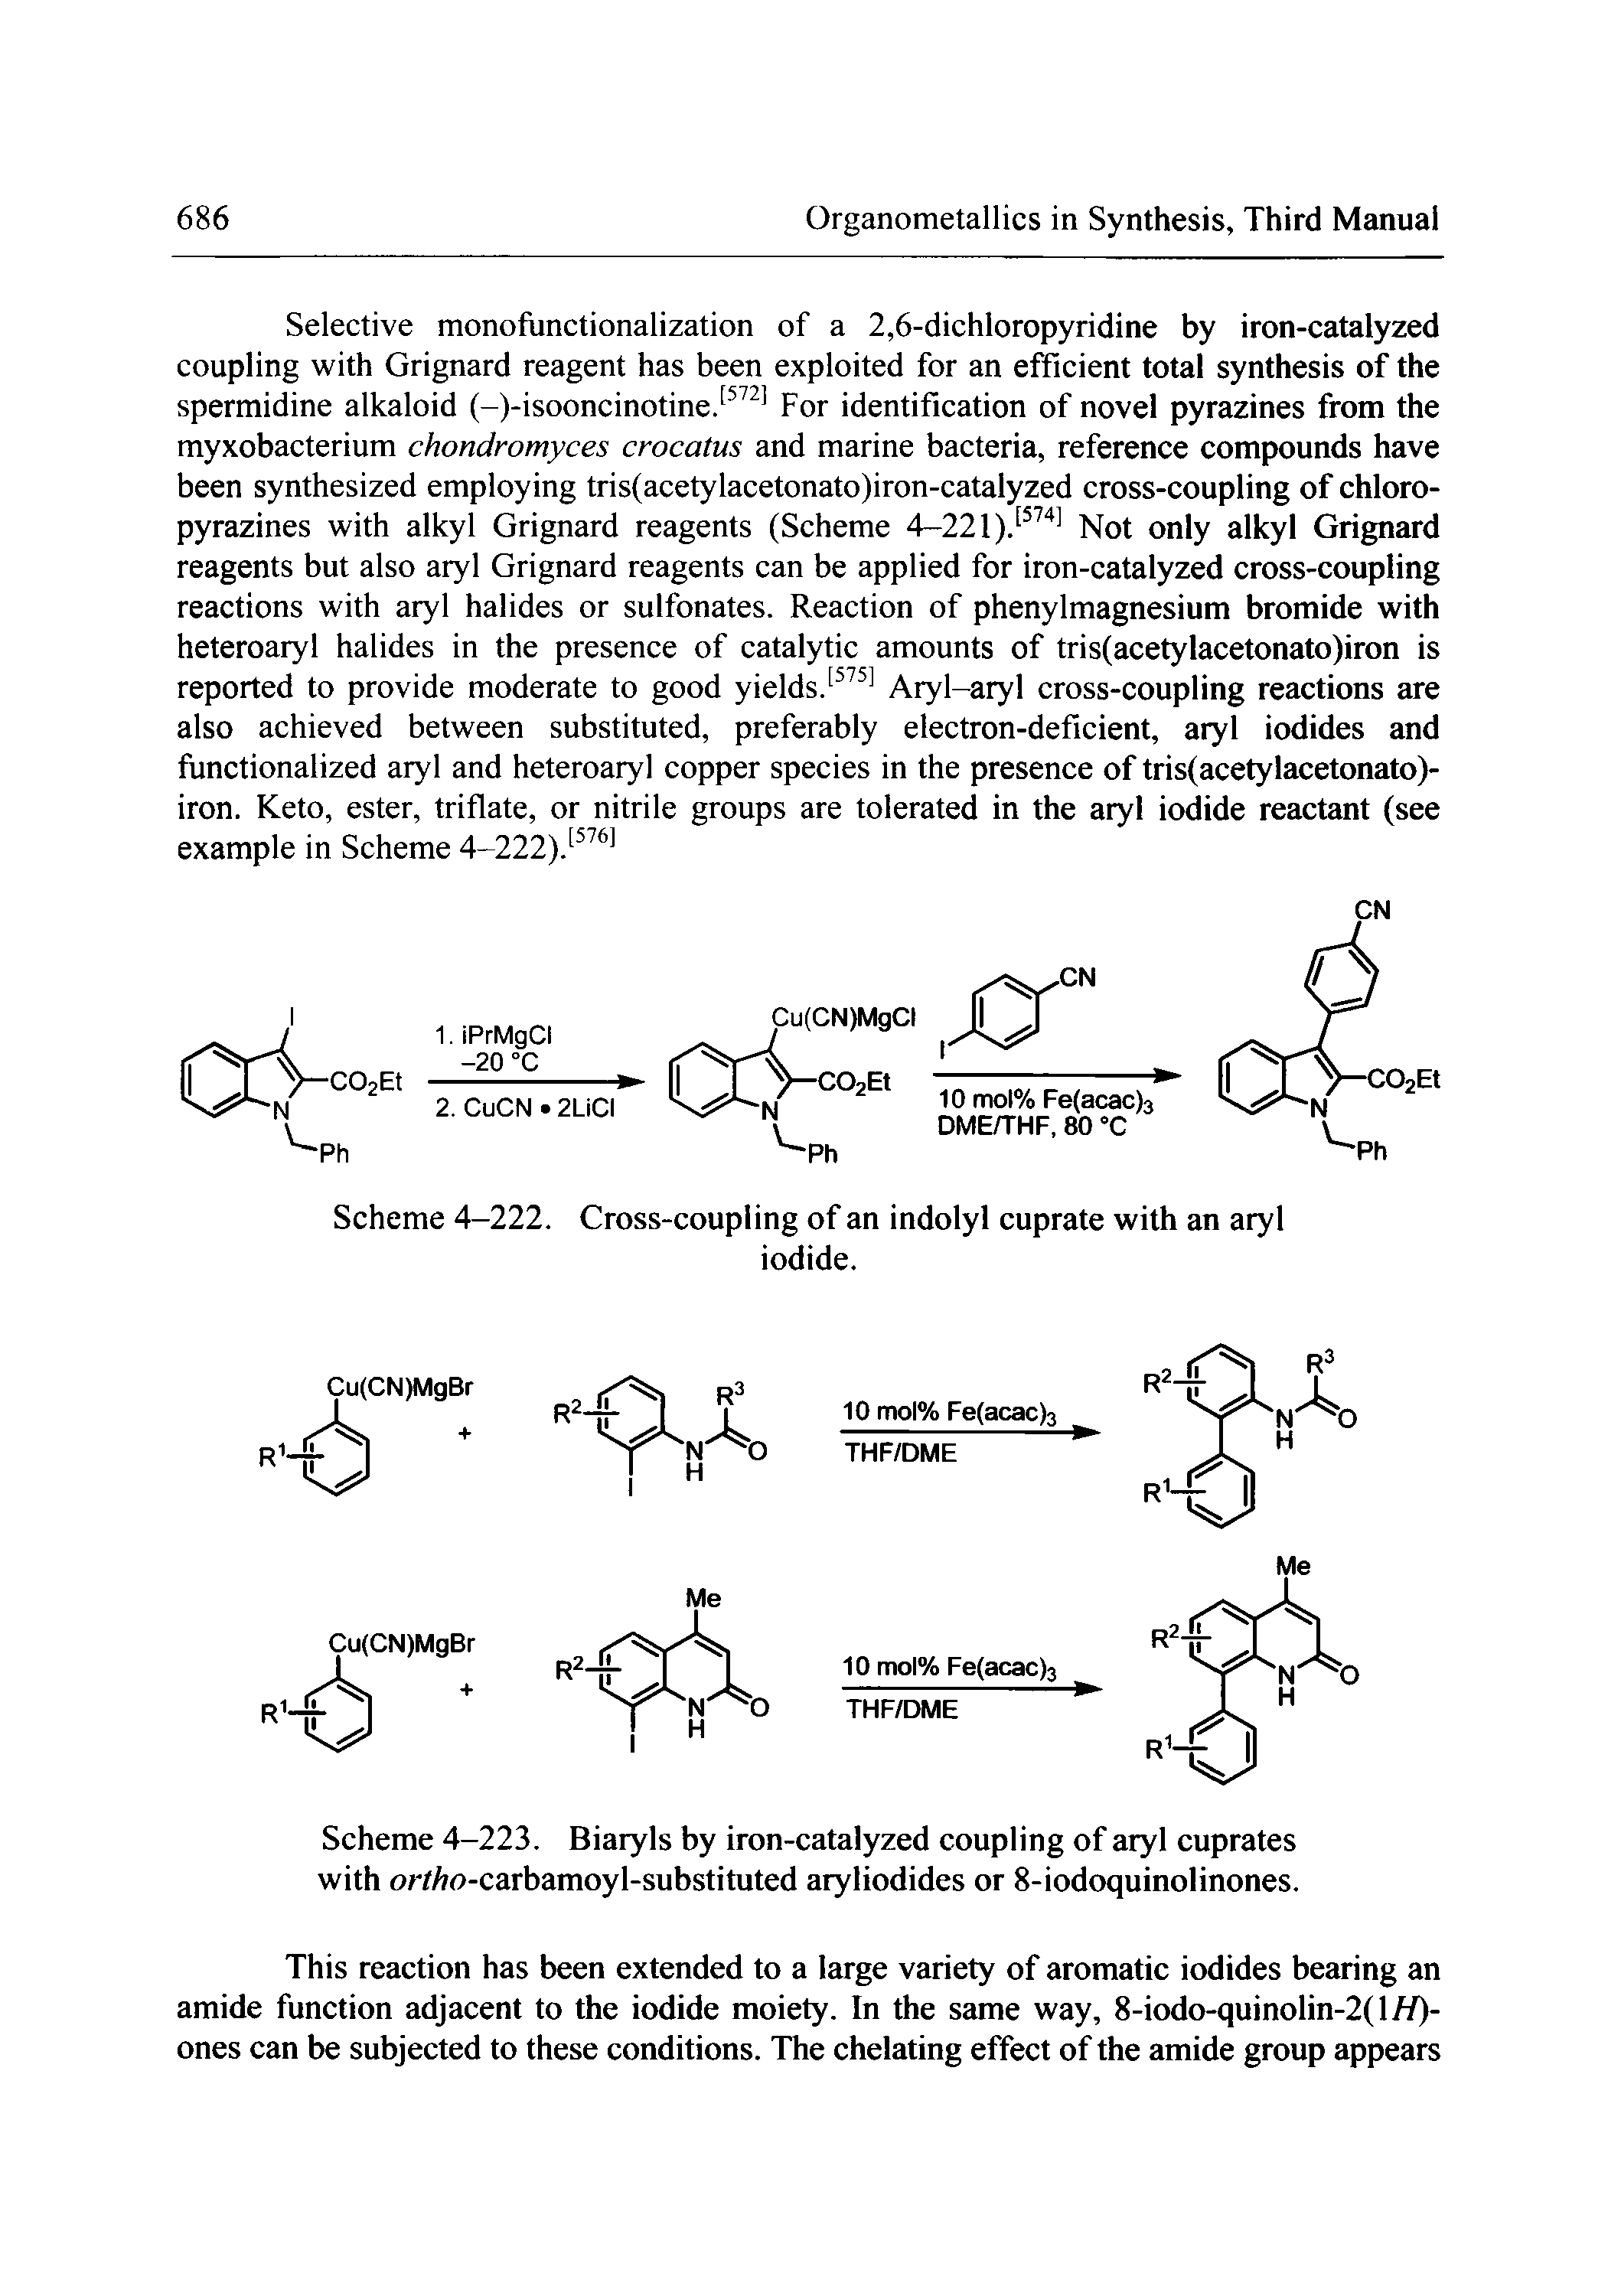 Scheme 4-223. Biaryls by iron-catalyzed coupling of aryl cuprates with or// o-carbamoyl-substituted aryliodides or 8-iodoquinolinones.